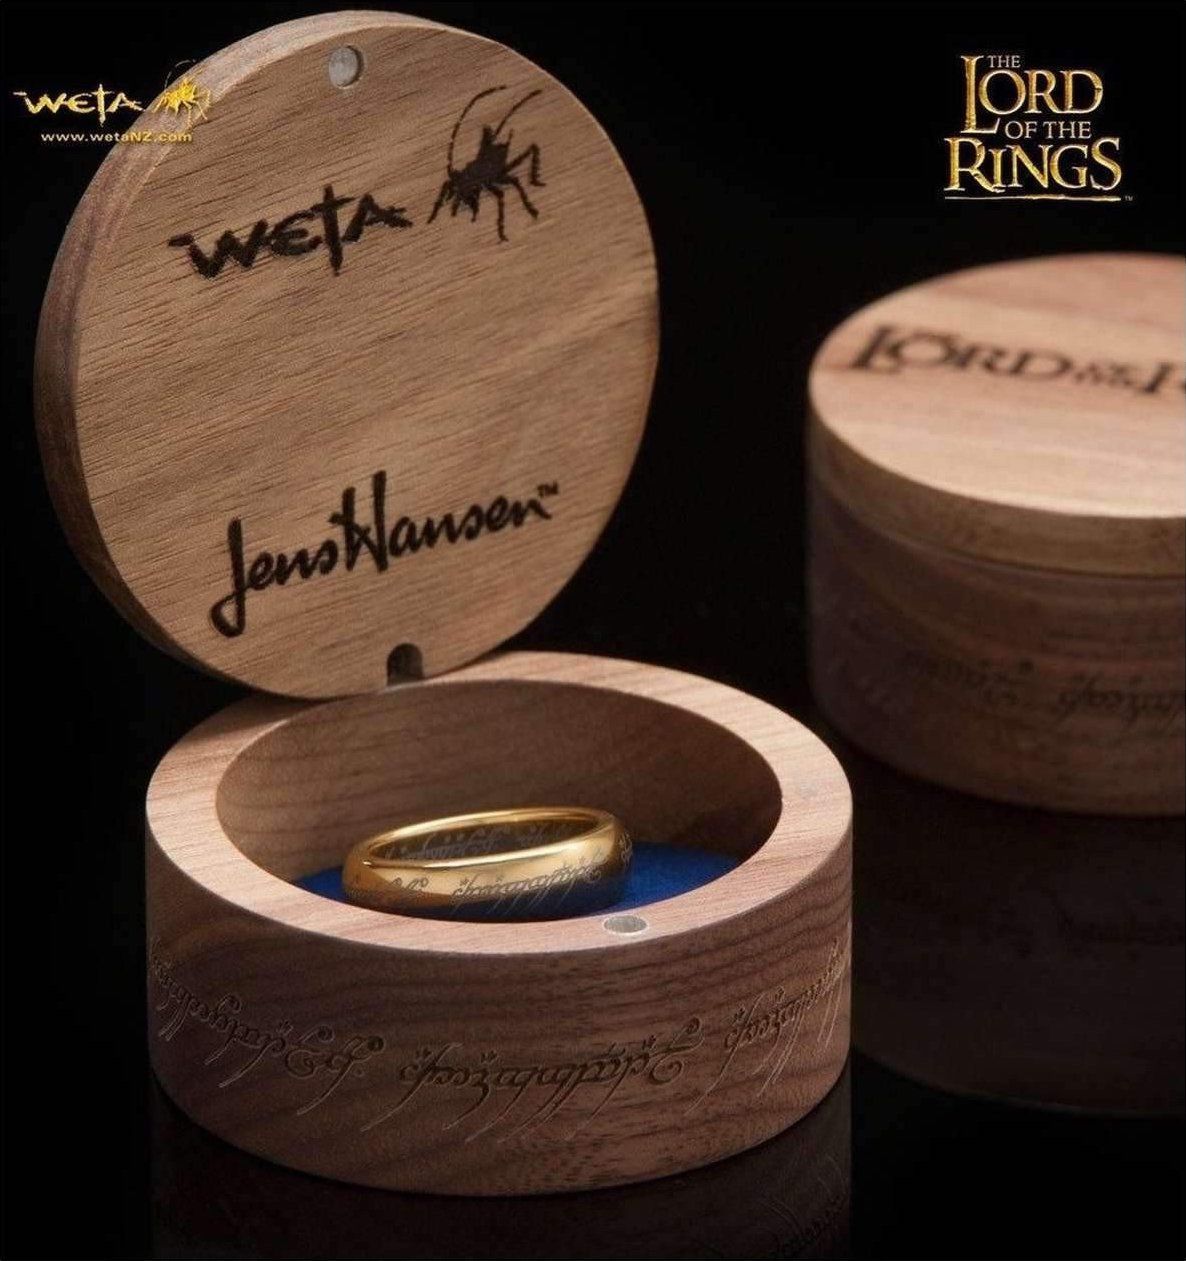 A replica of the One Ring displayed in a gift box bearing the logos of Wētā Workshop and Jens Hansen.